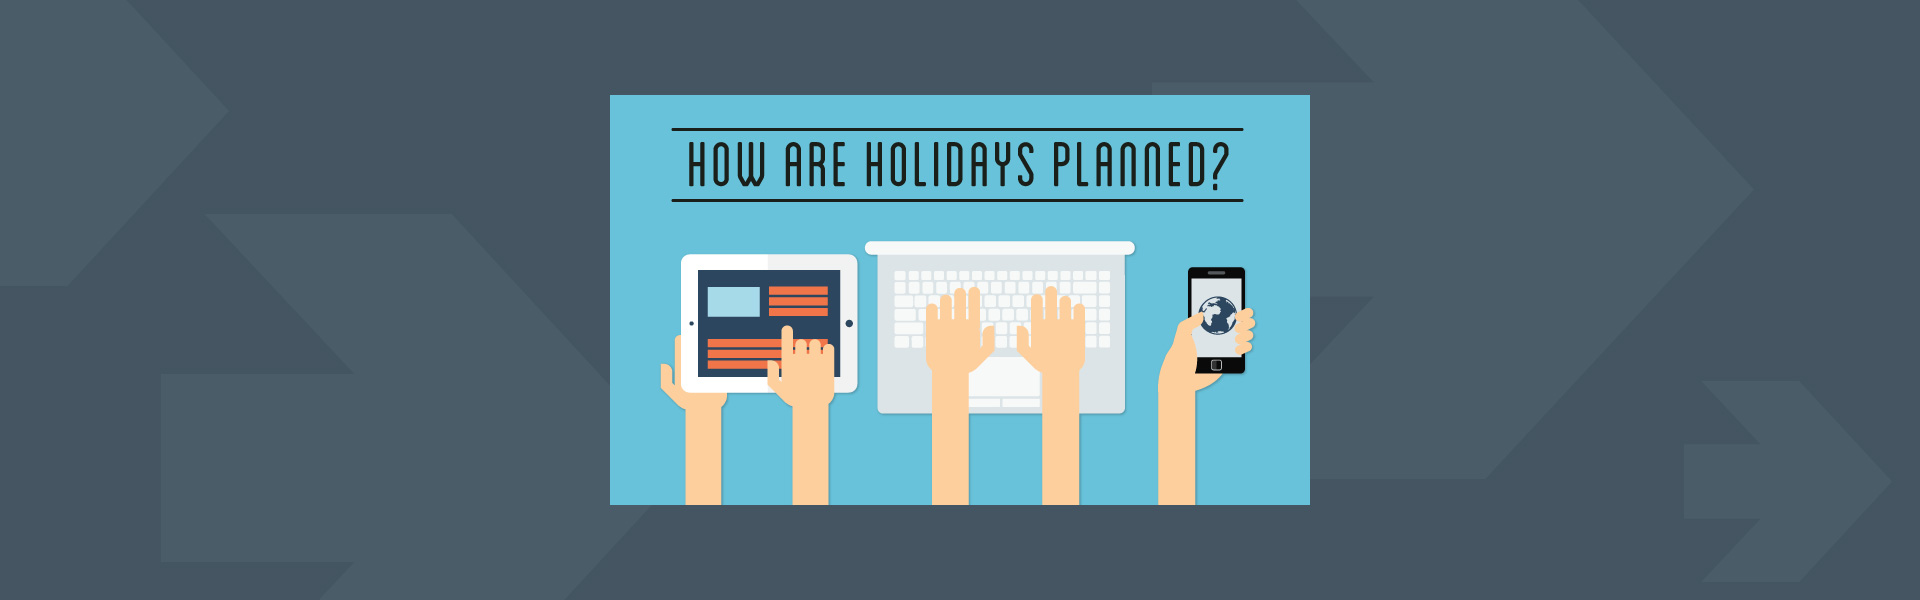 How are holidays planned?